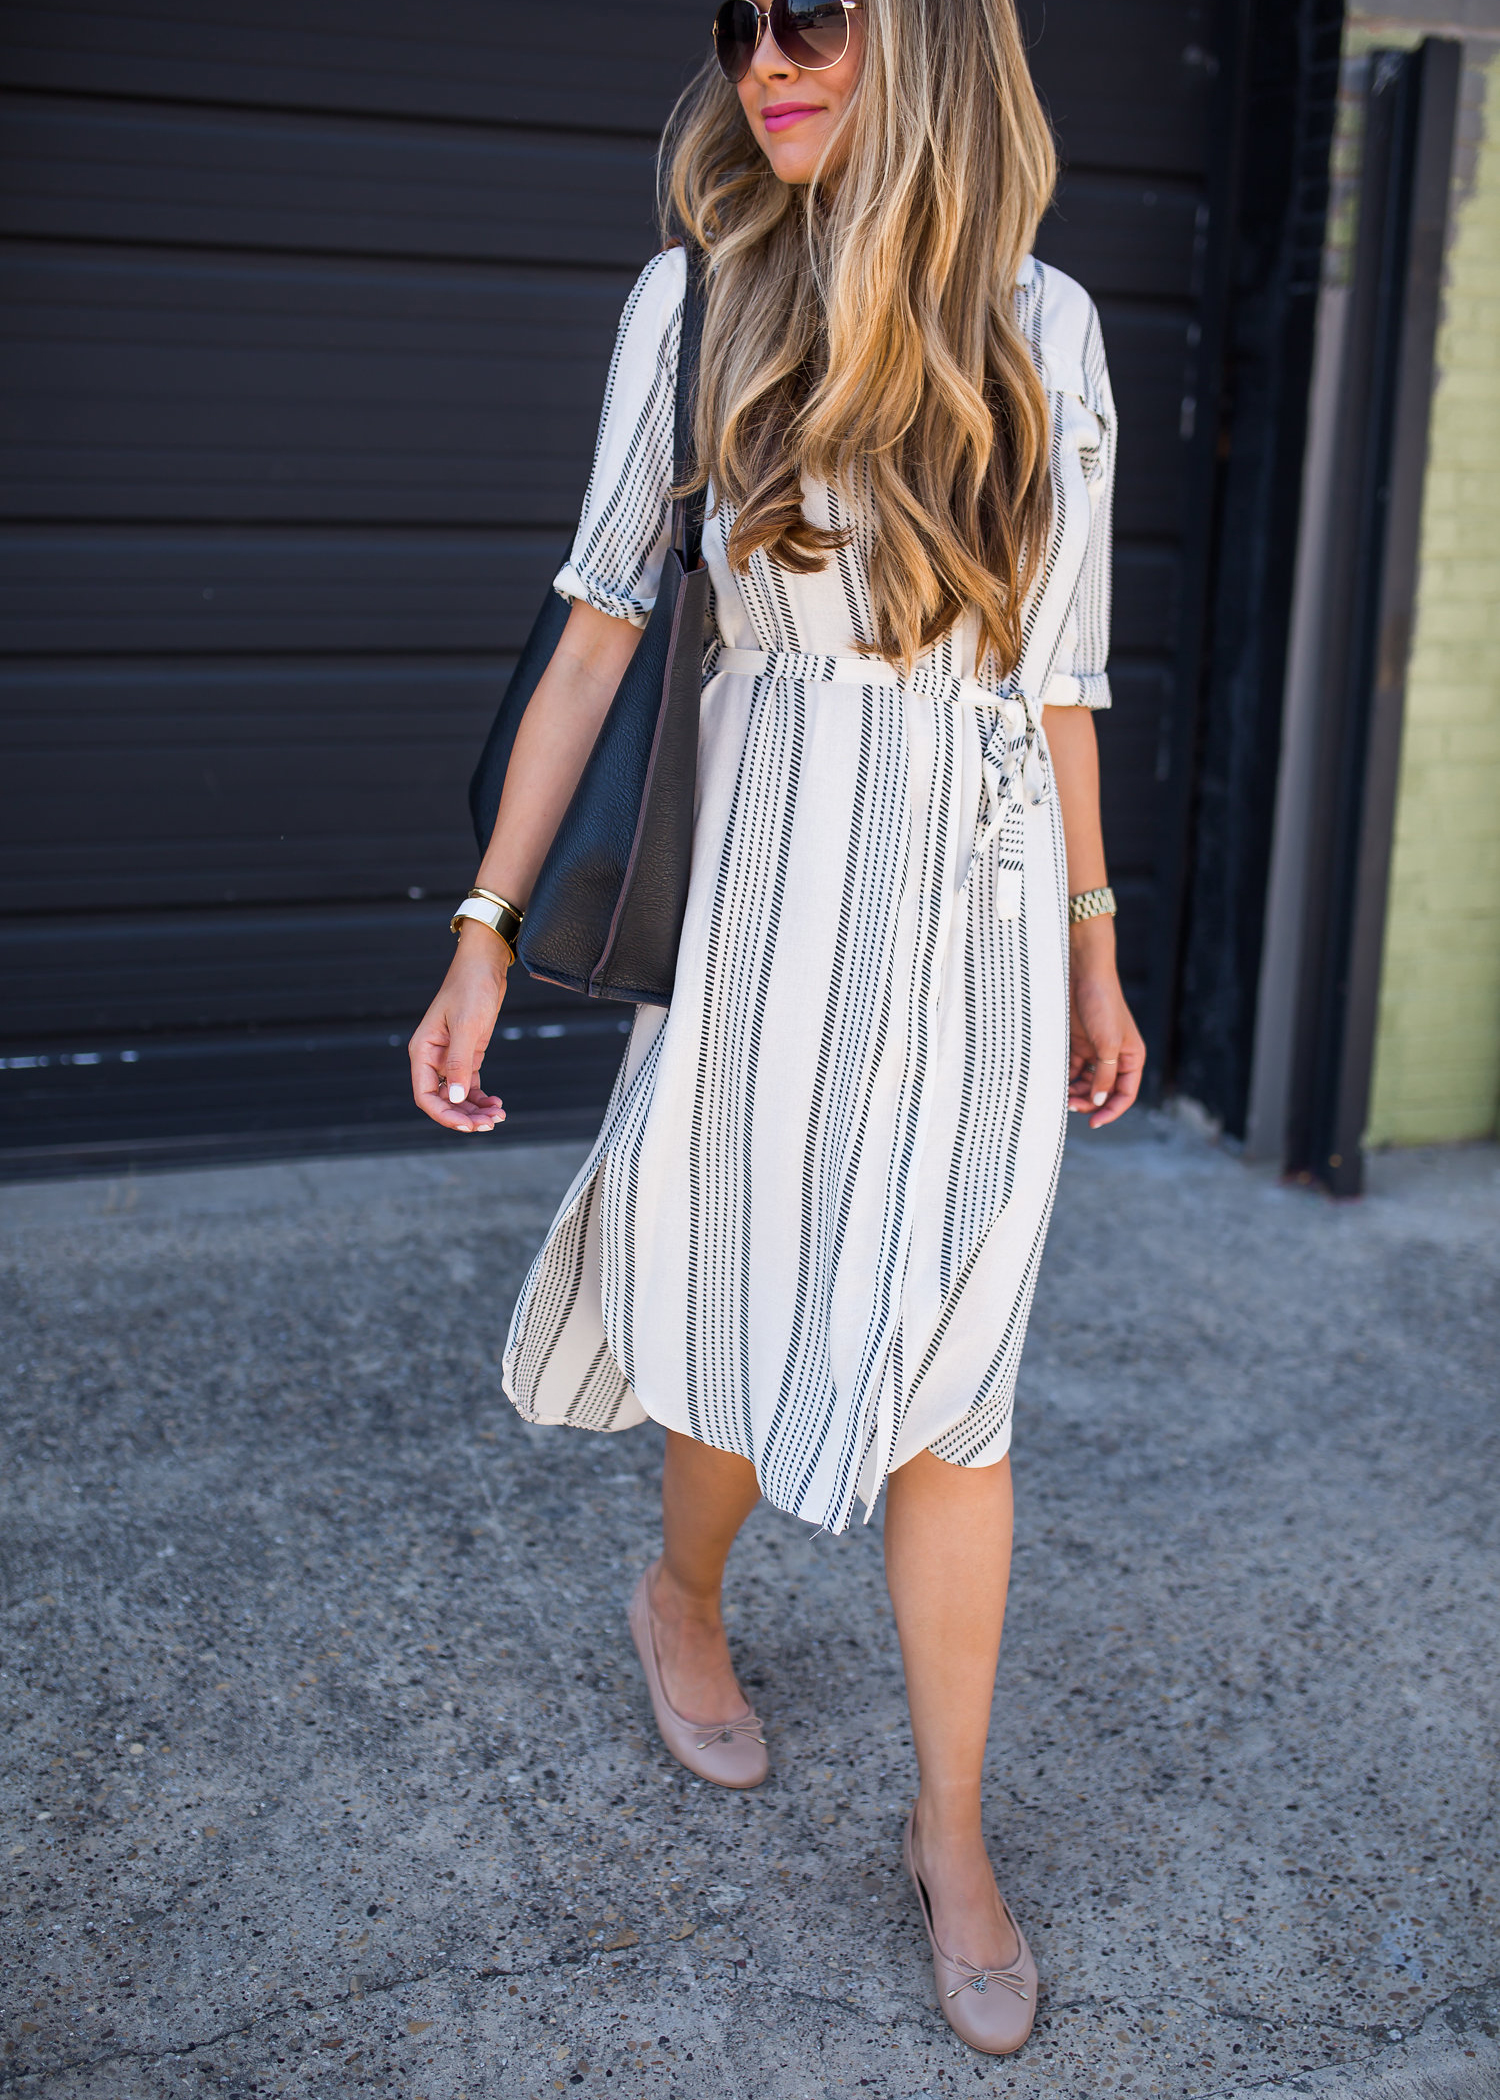 Ashley Robertson in Striped Shirtdress Outfit 